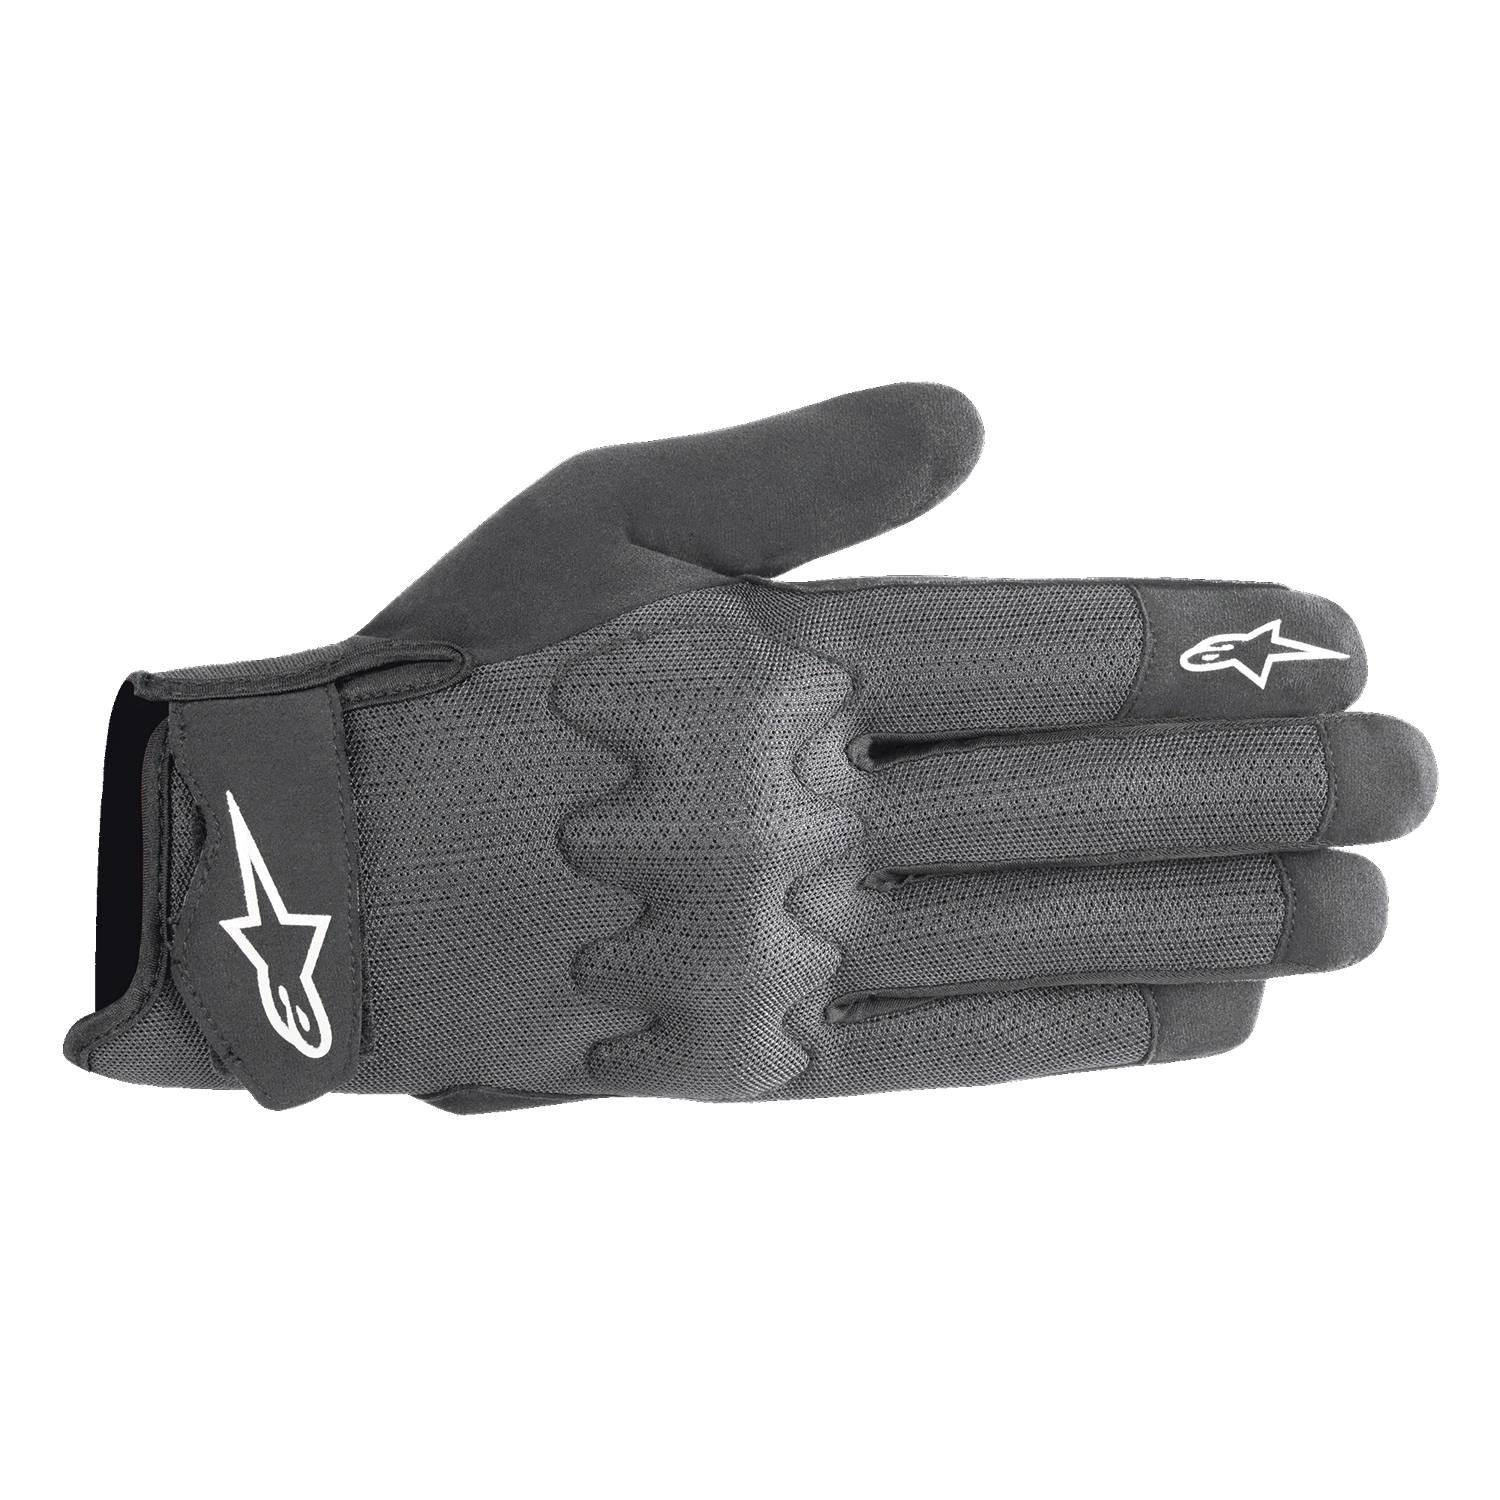 Image of EU Alpinestars Stated Air Gloves Black Silver Taille M